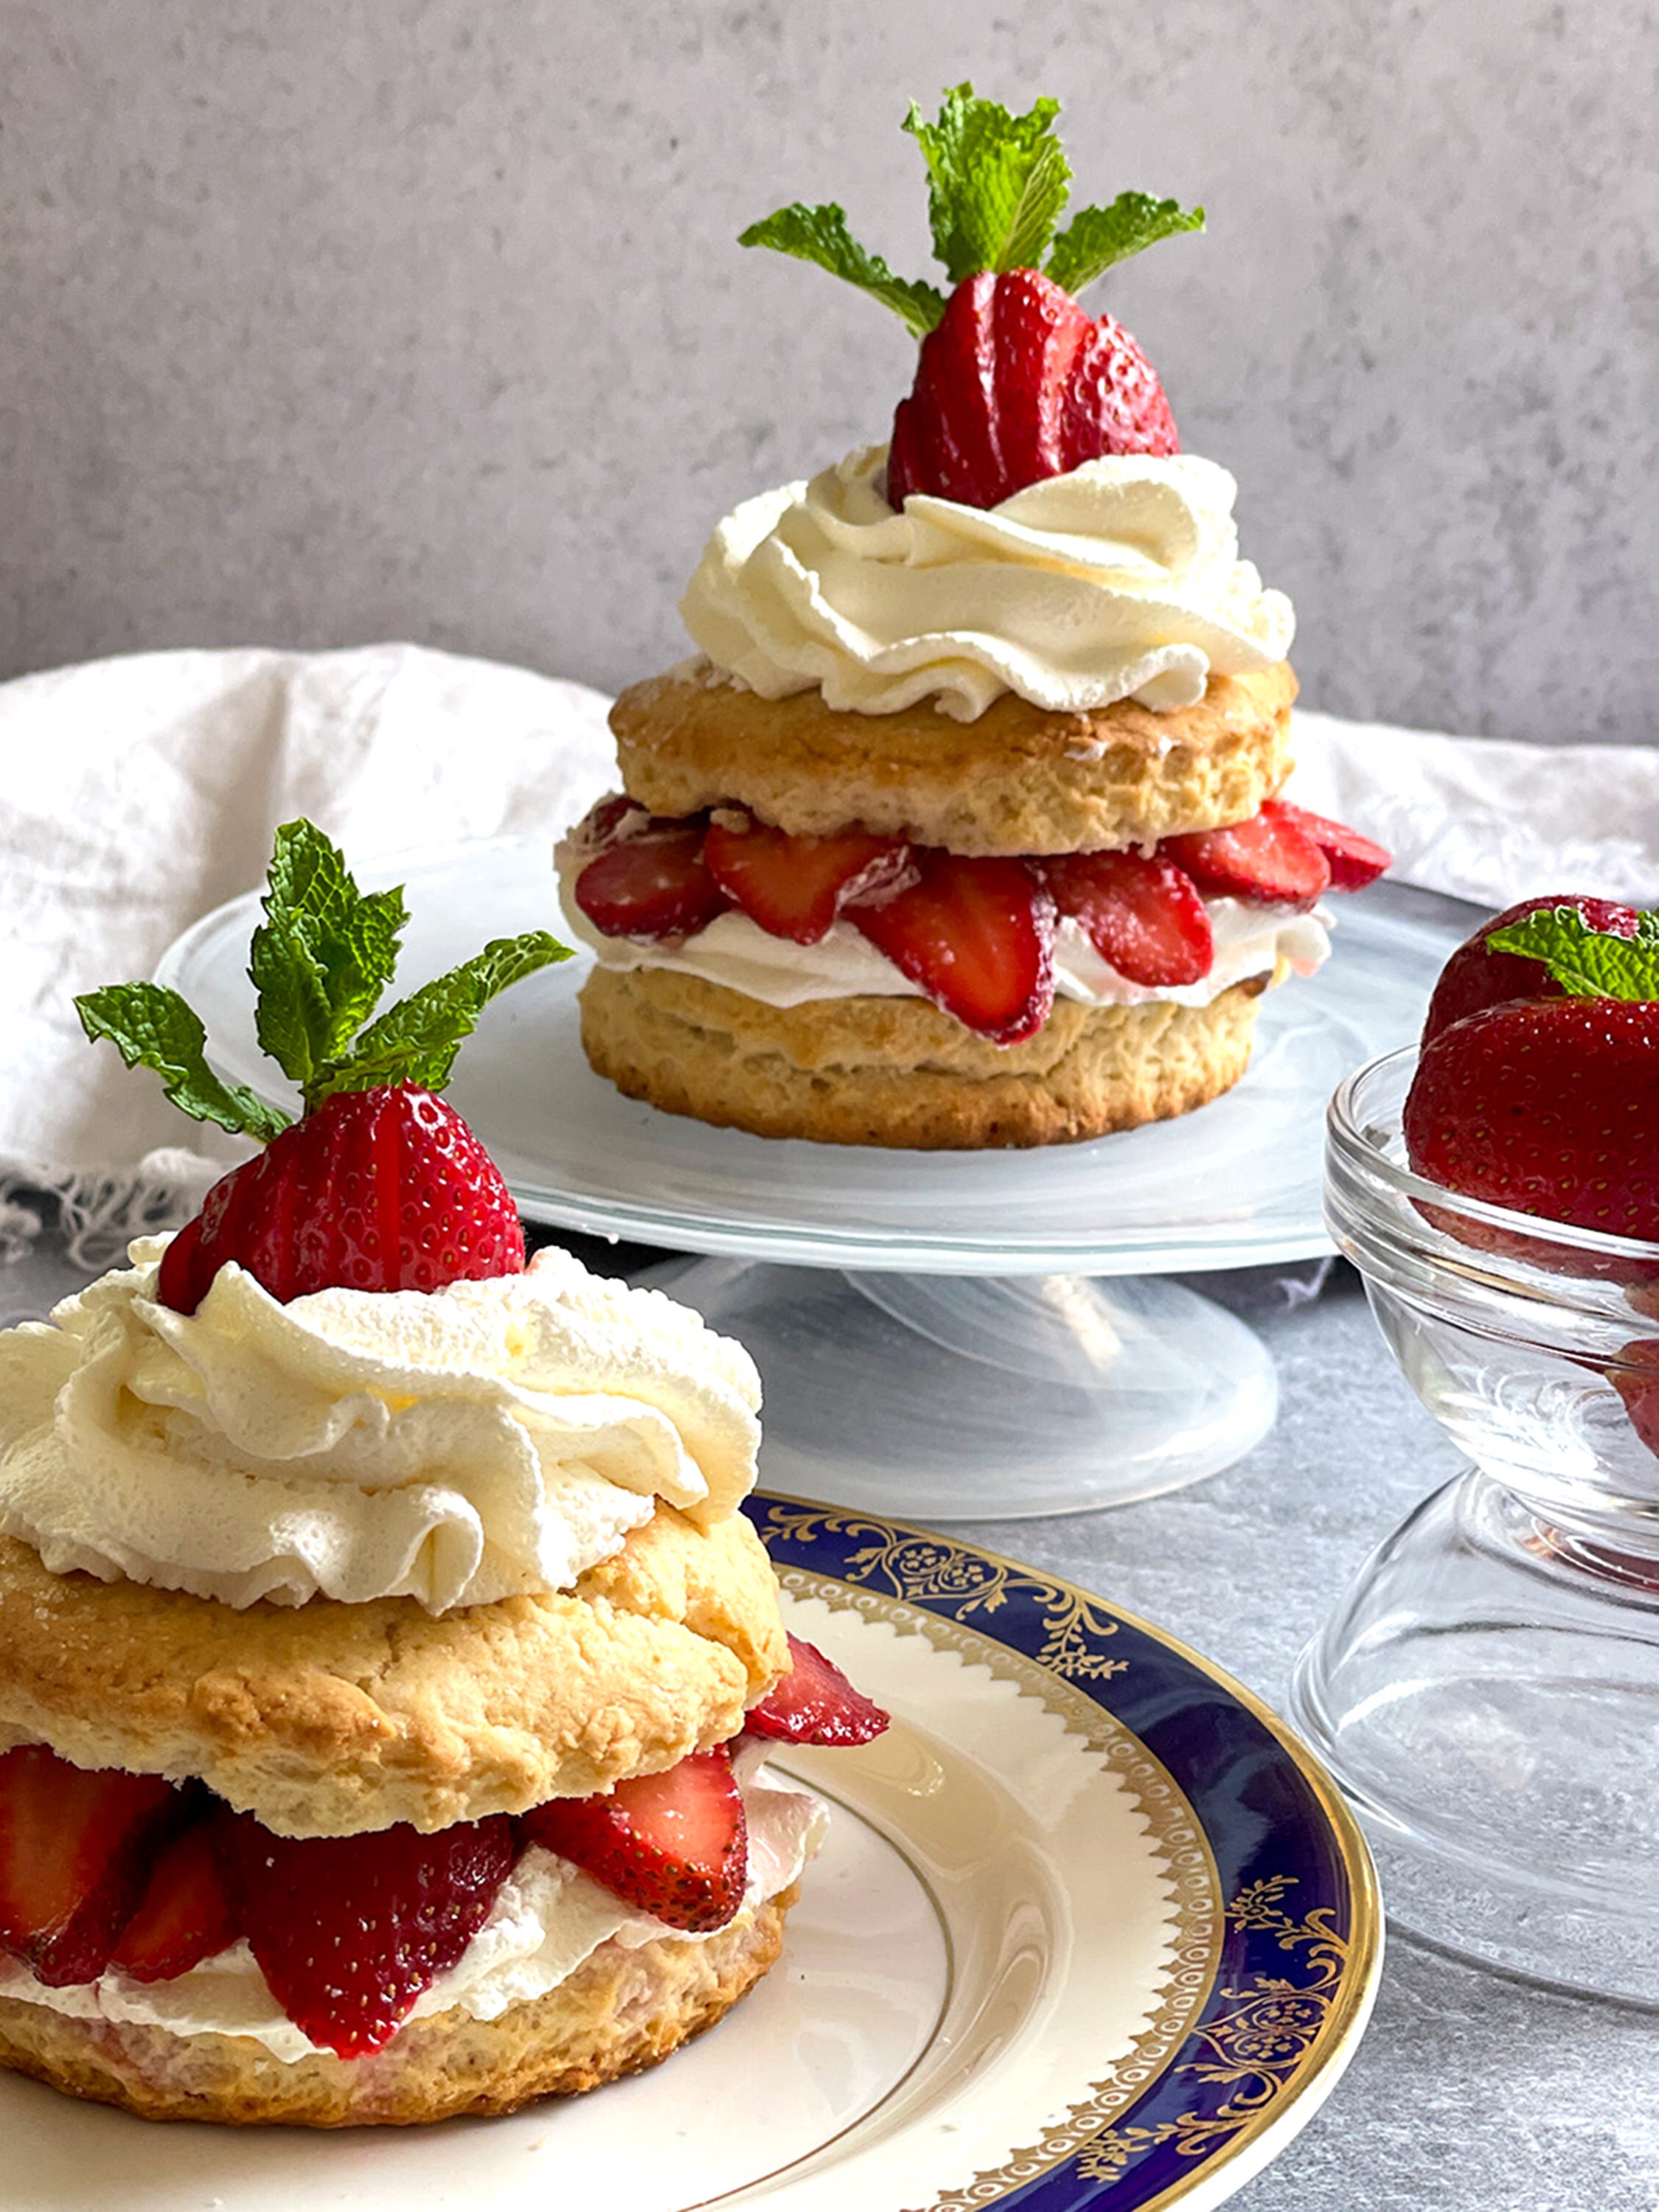 Biscuit mix cuts the time on luscious strawberry shortcake